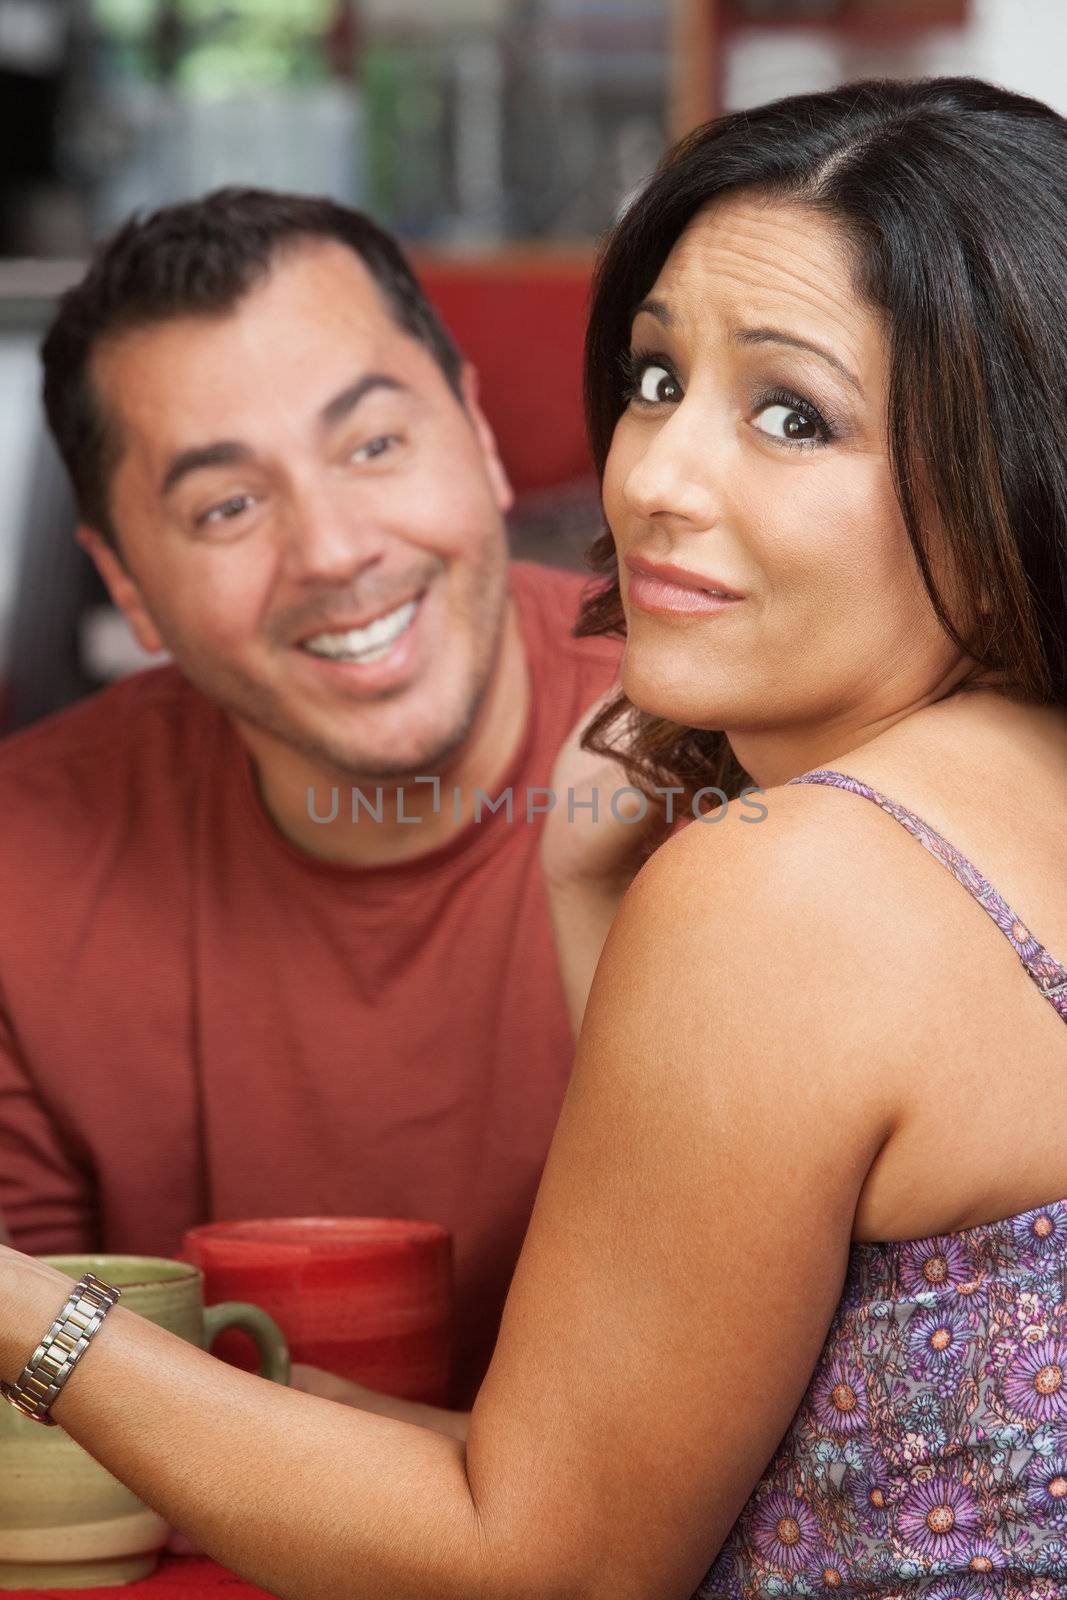 Man flirting with attractive Mexican female in a cafe